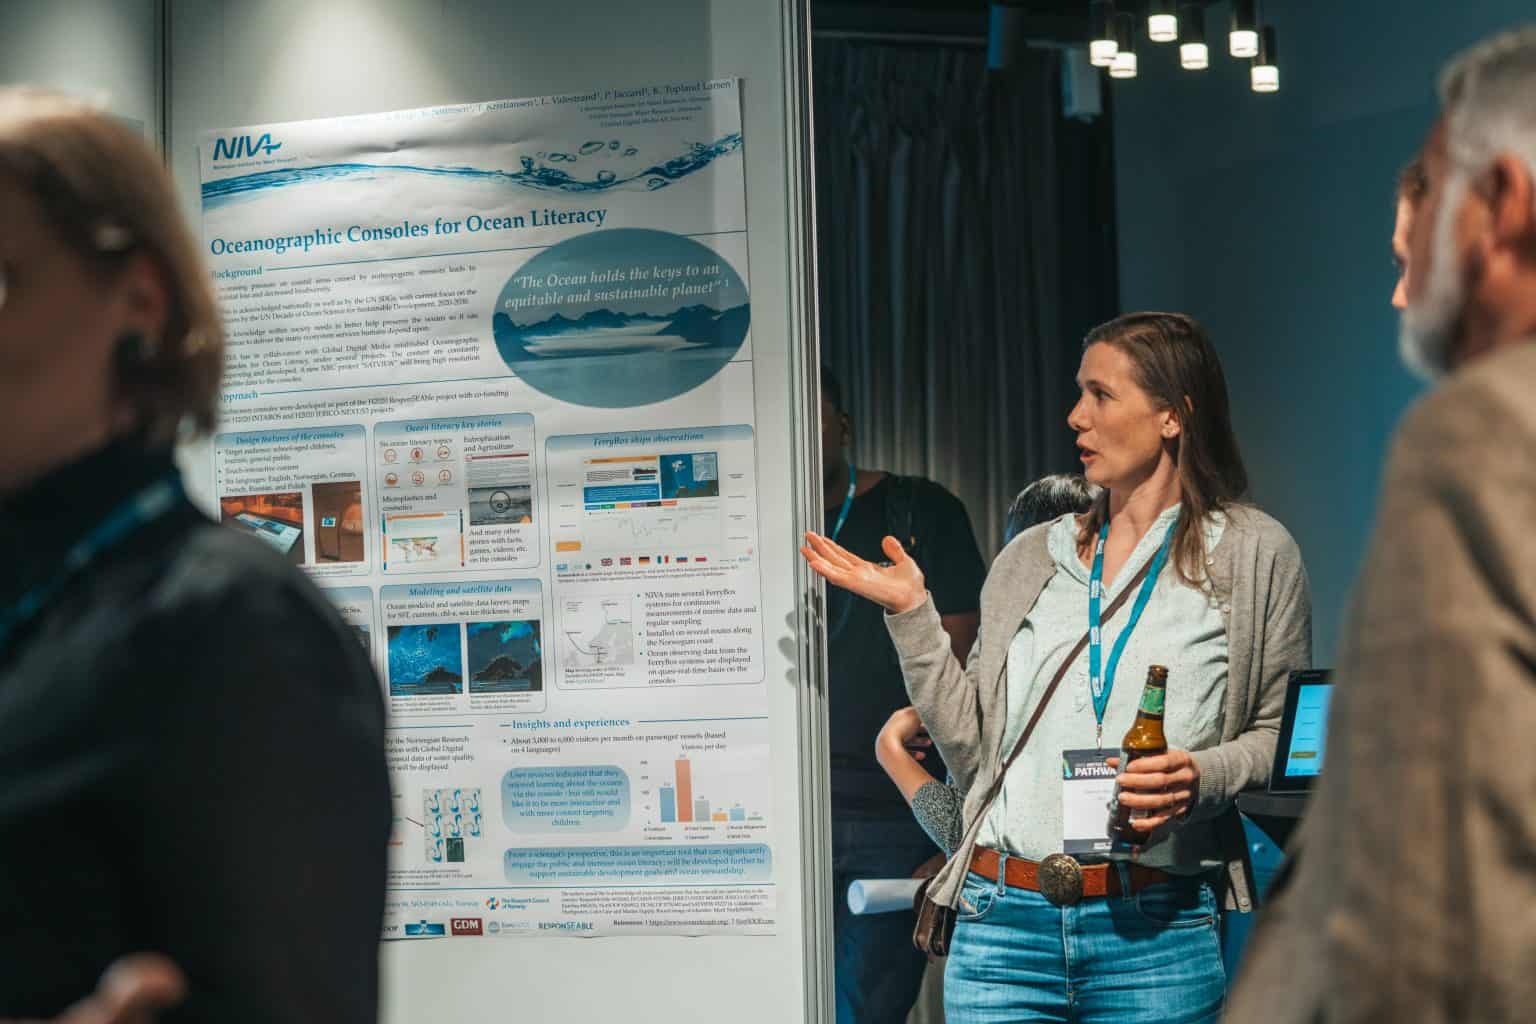 A female scientist stands in front of her poster talking to two people about her work.